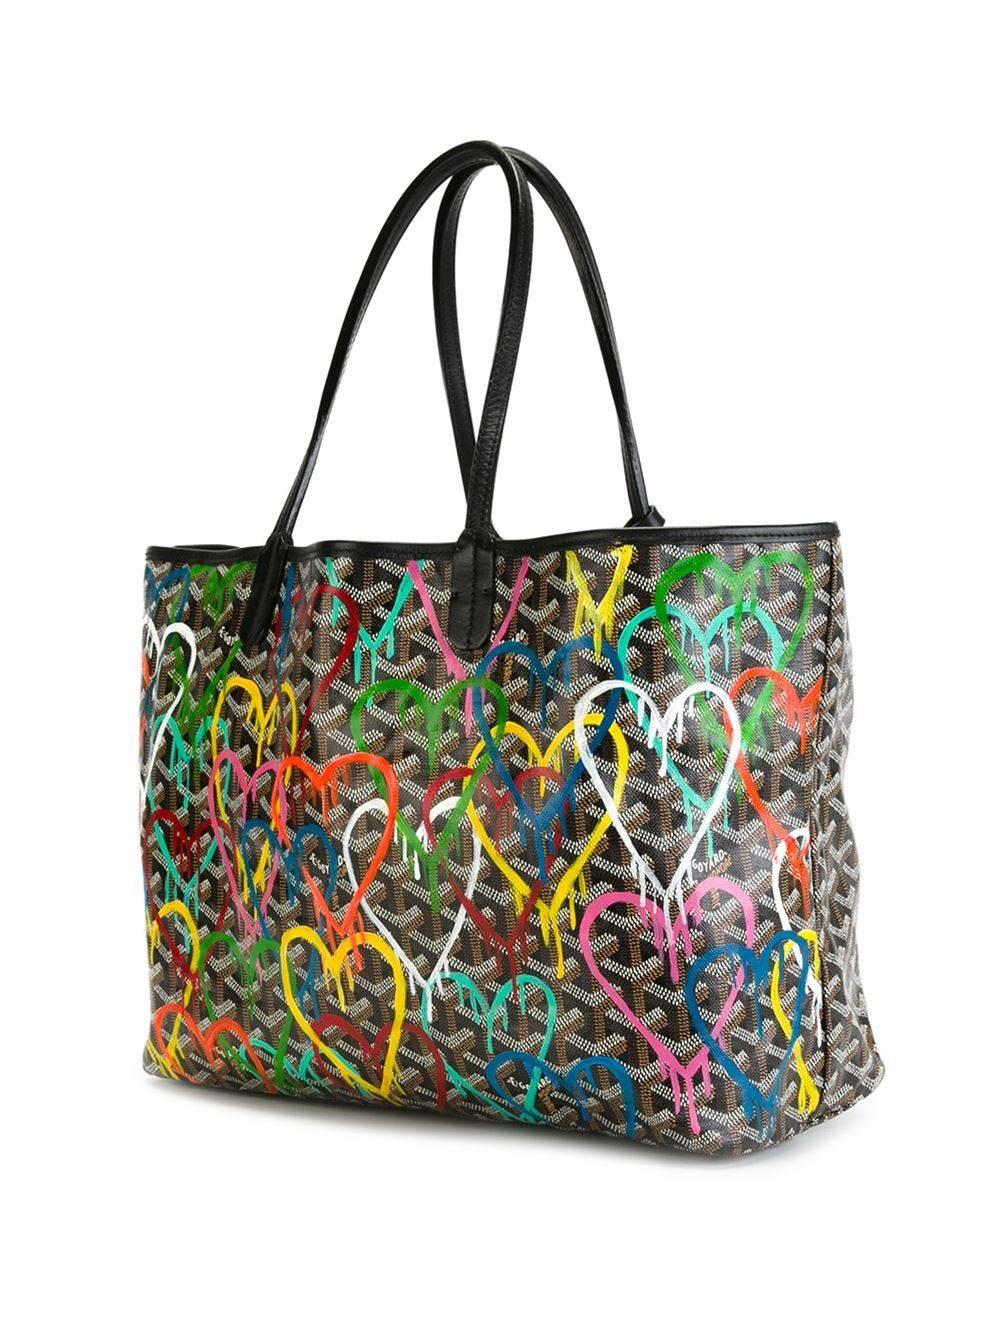 Multicoloured leather monogram shopper tote featuring top handles, a monogram print, a main internal compartment, a graffiti heart print to the front and a matching pouch.

Colour: Multi-coloured

Material: Leather 100%

Measurements: W: 47cm,